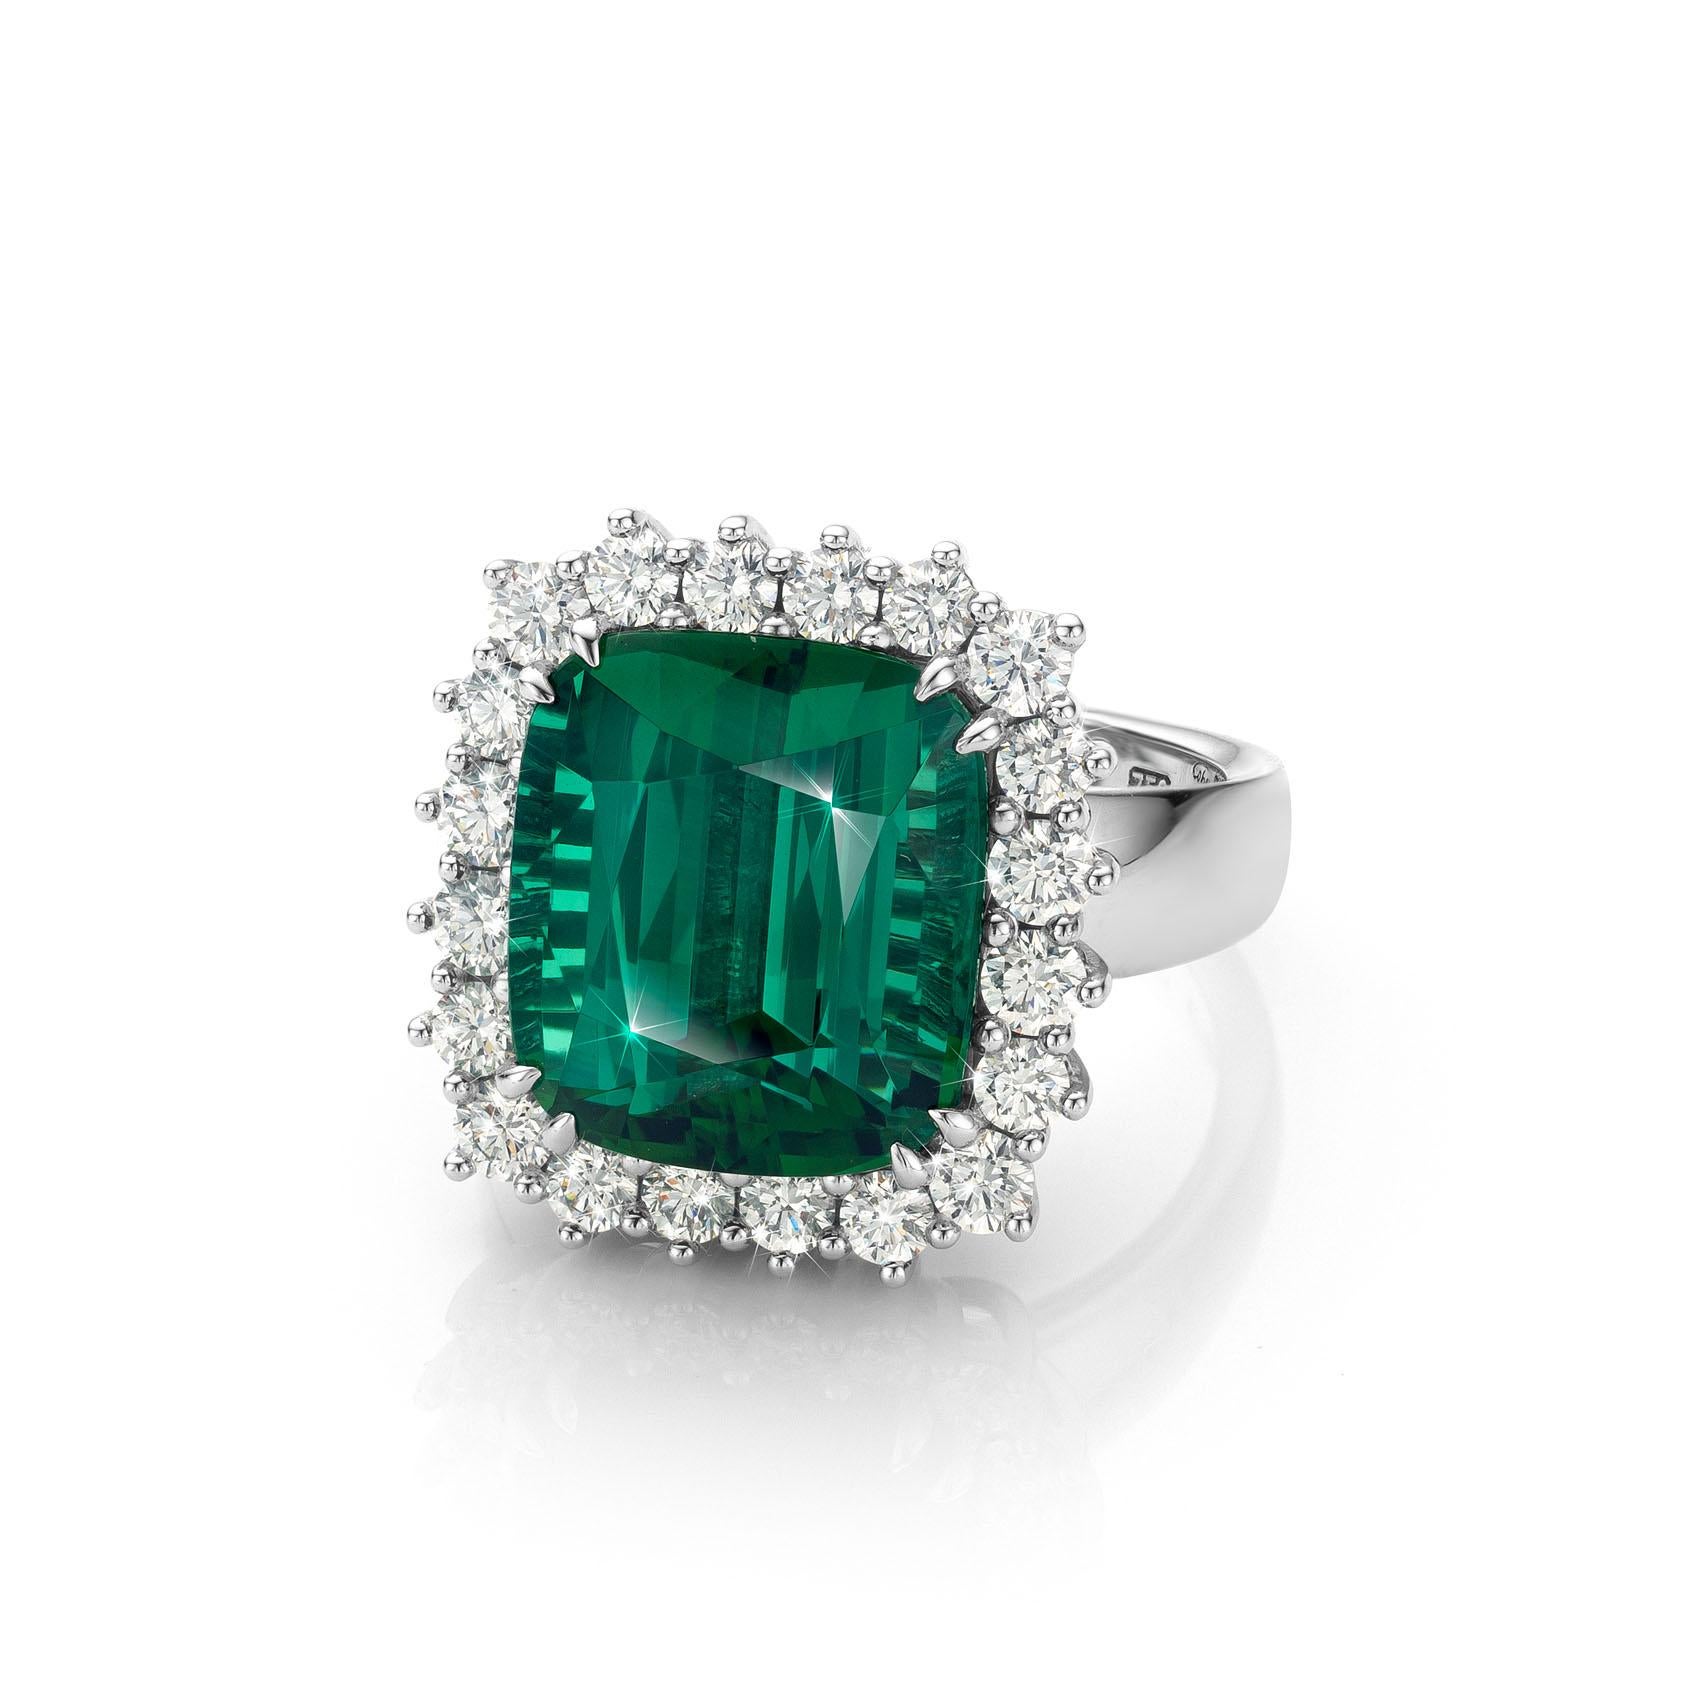 Cober with bright Green  11.61 Carat Tourmaline 20 Diamonds White Gold Ring For Sale 1